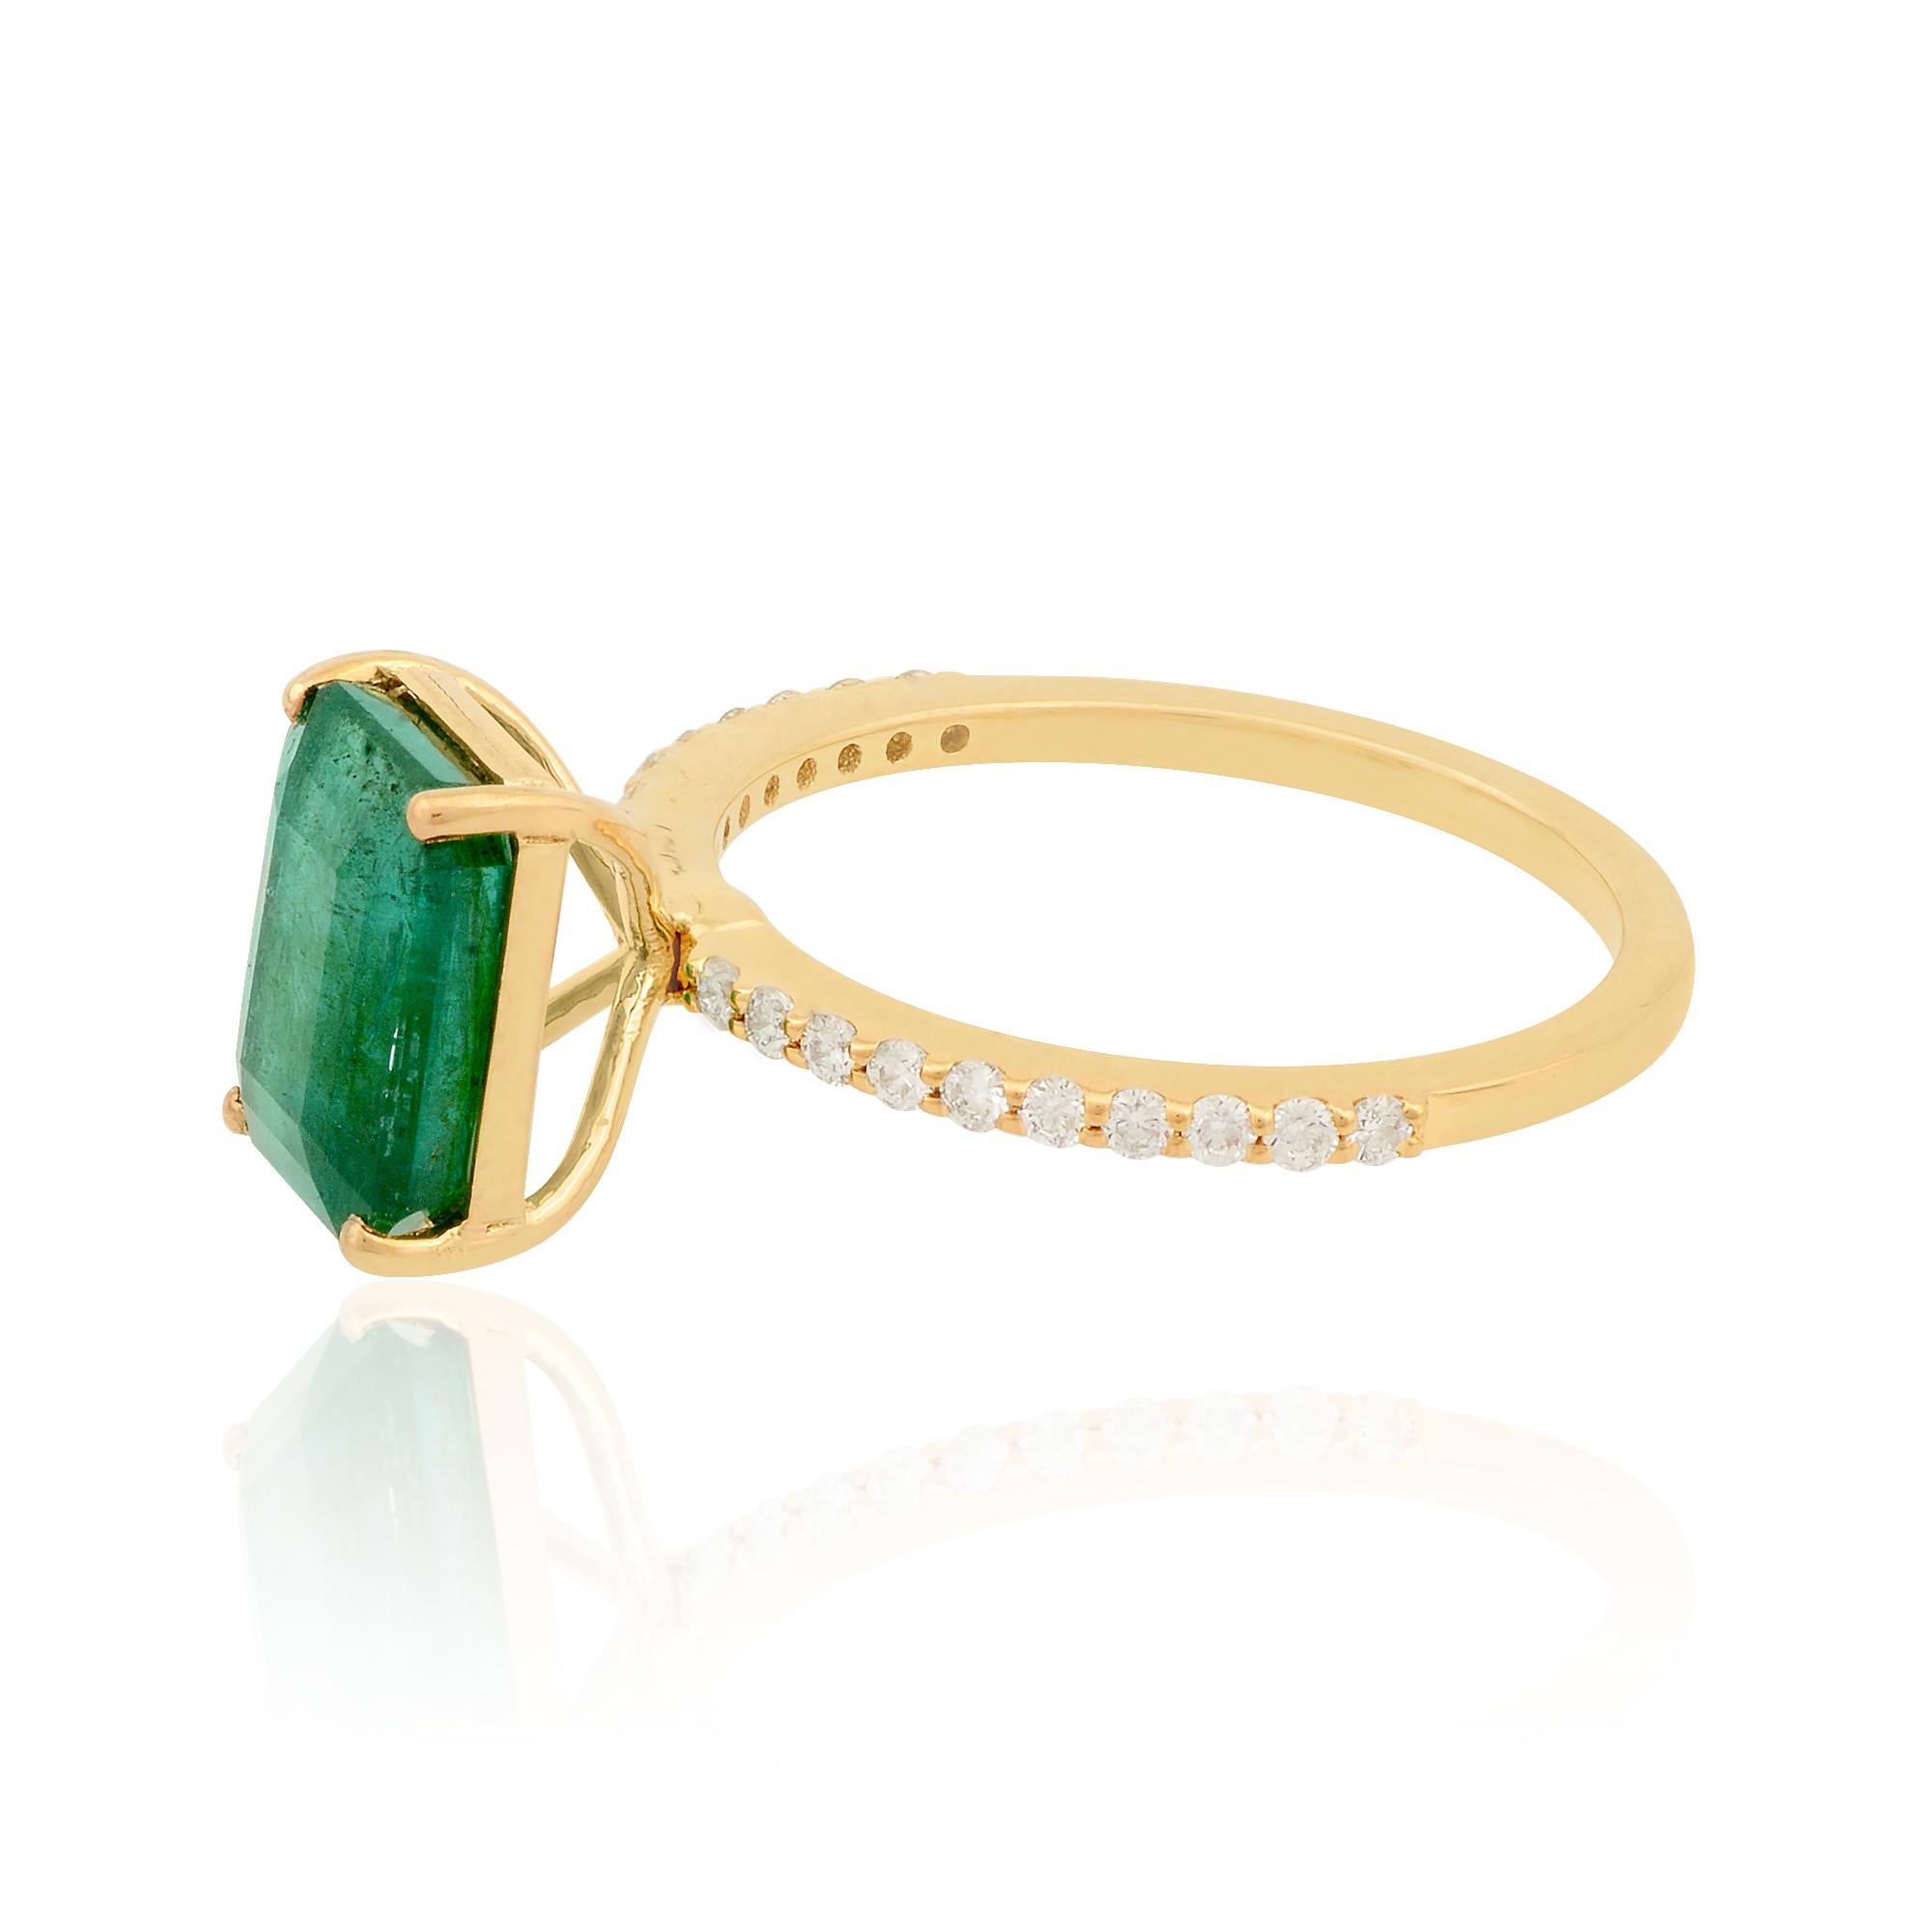 For Sale:  Natural Emerald Gemstone Ring Diamond Pave Solid 18k Yellow Gold Jewelry 5